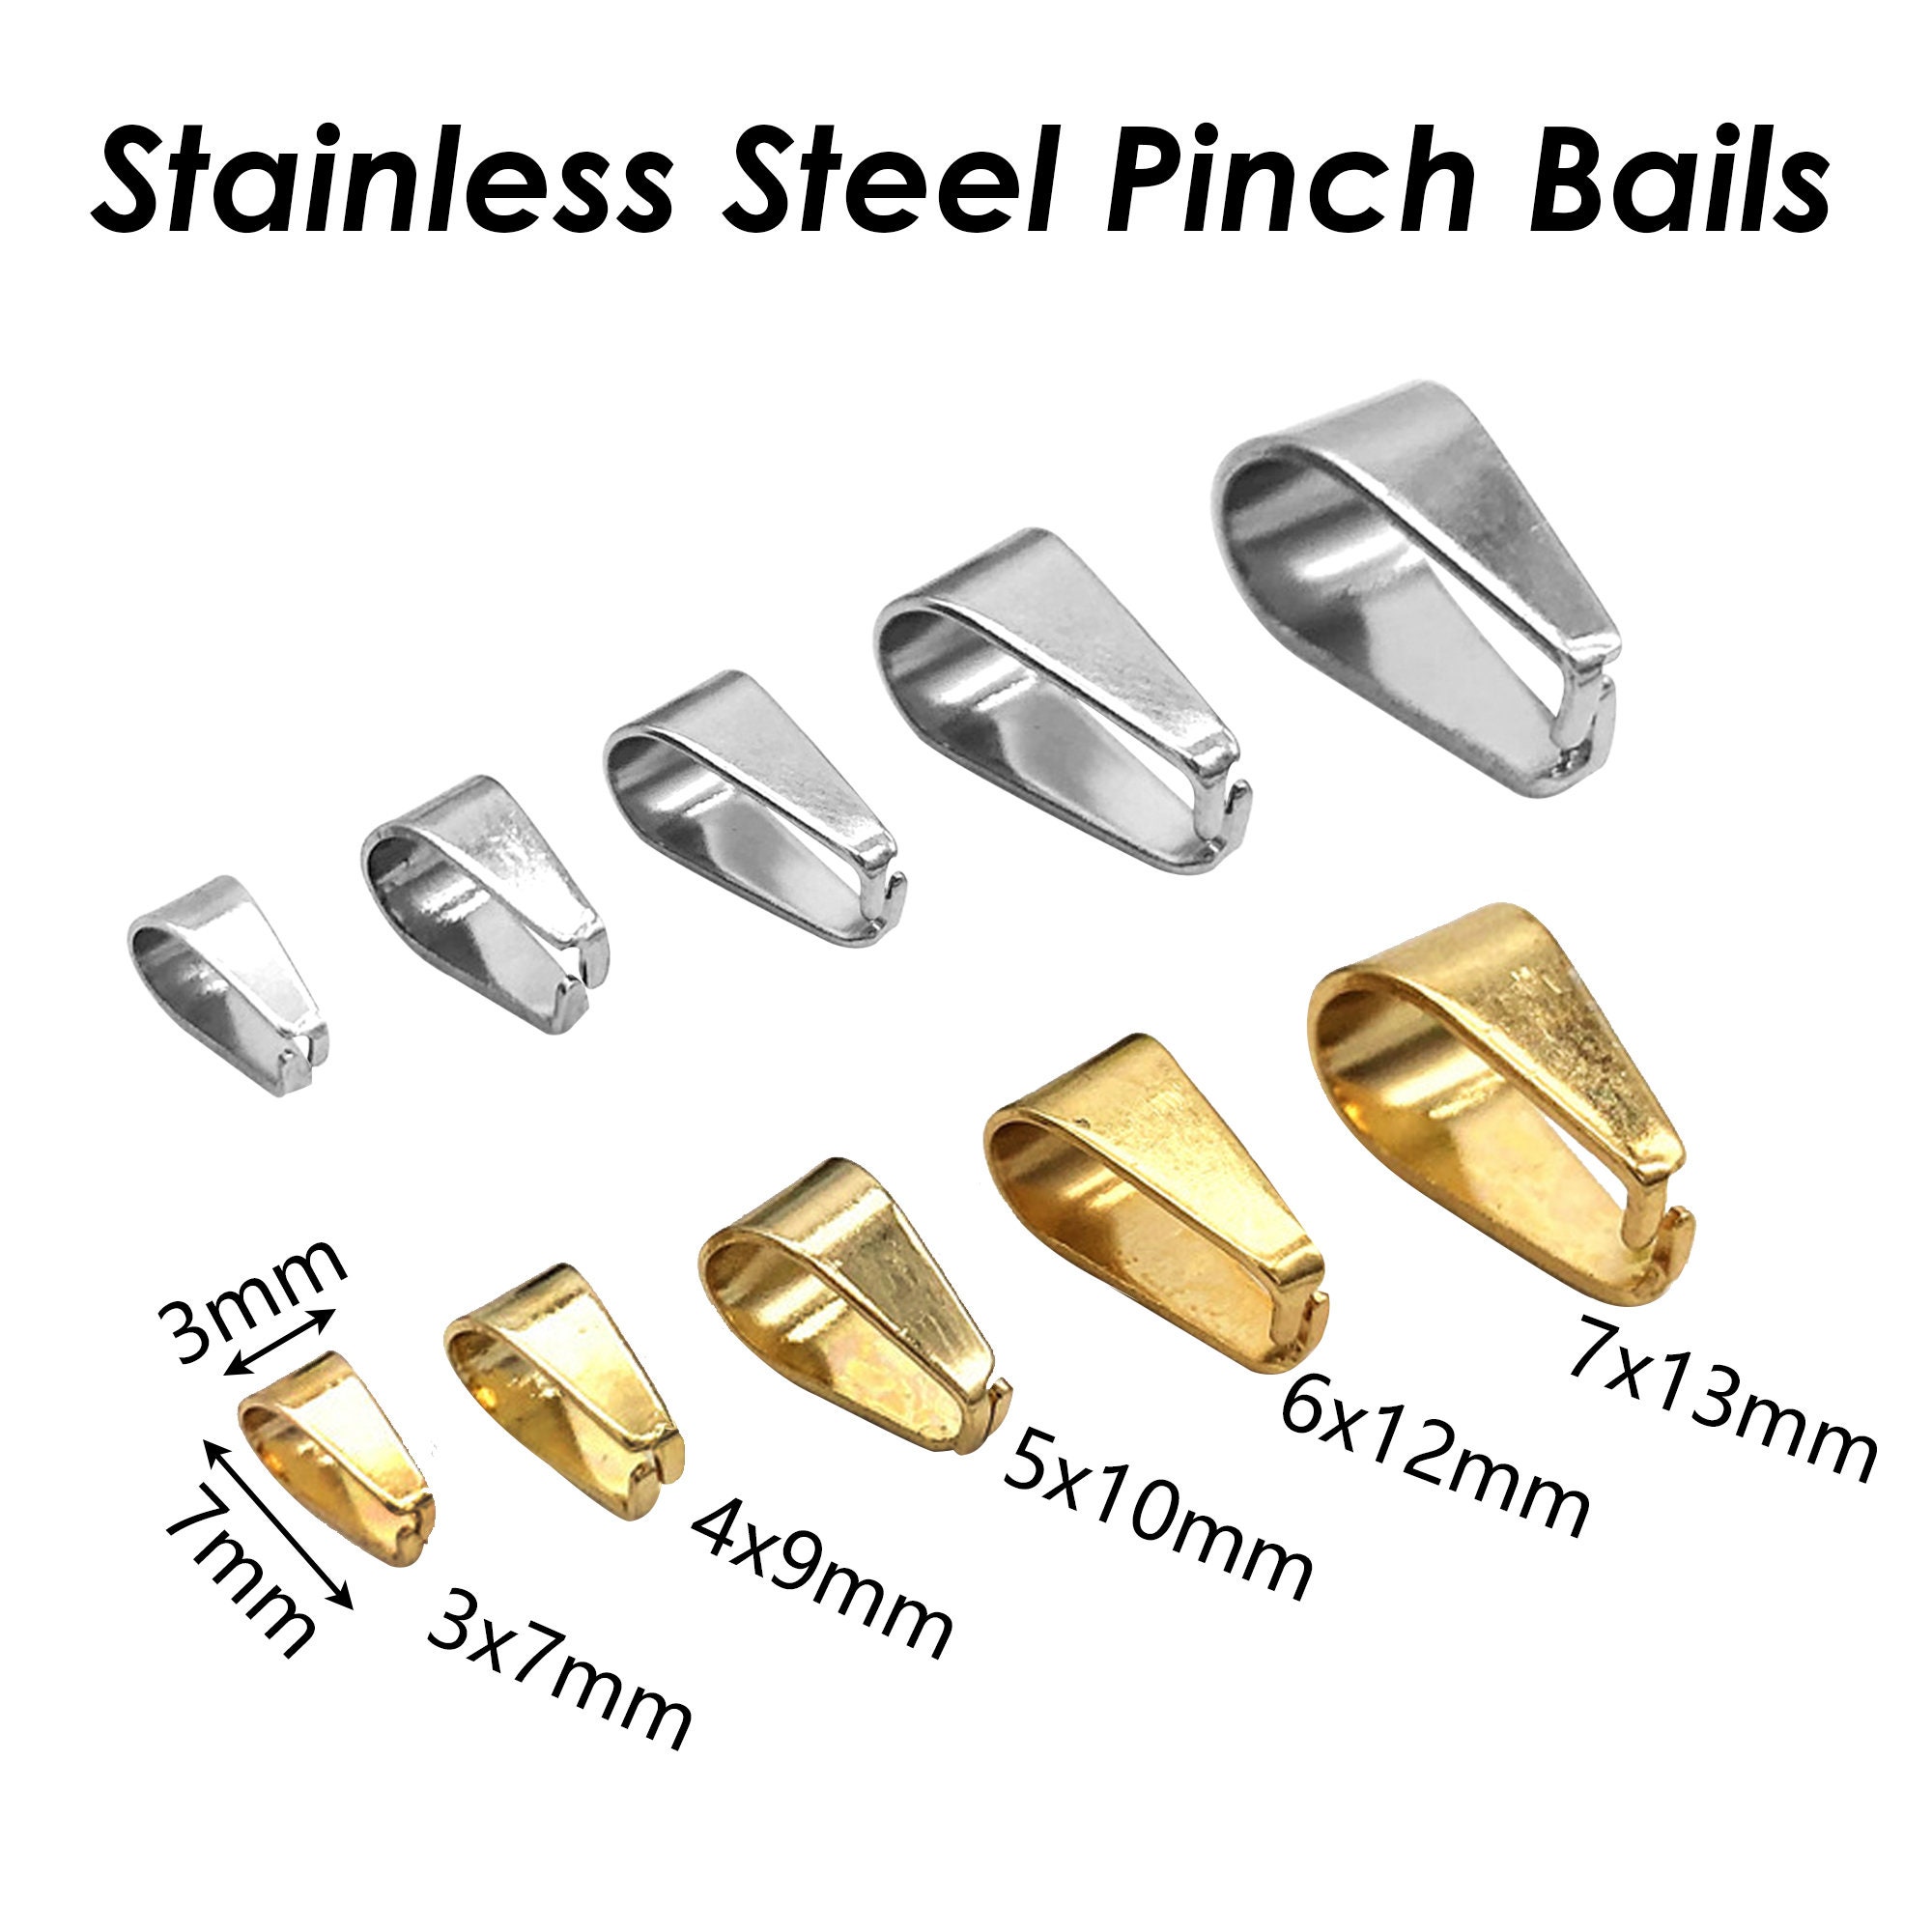 5 or 10 Pinch Bails Stainless Steel for Jewelry and Pendant Making, DIY  Jewelry, Decorated Pinch Bail, DIY Necklace Clip, Platinum Snap Bail 